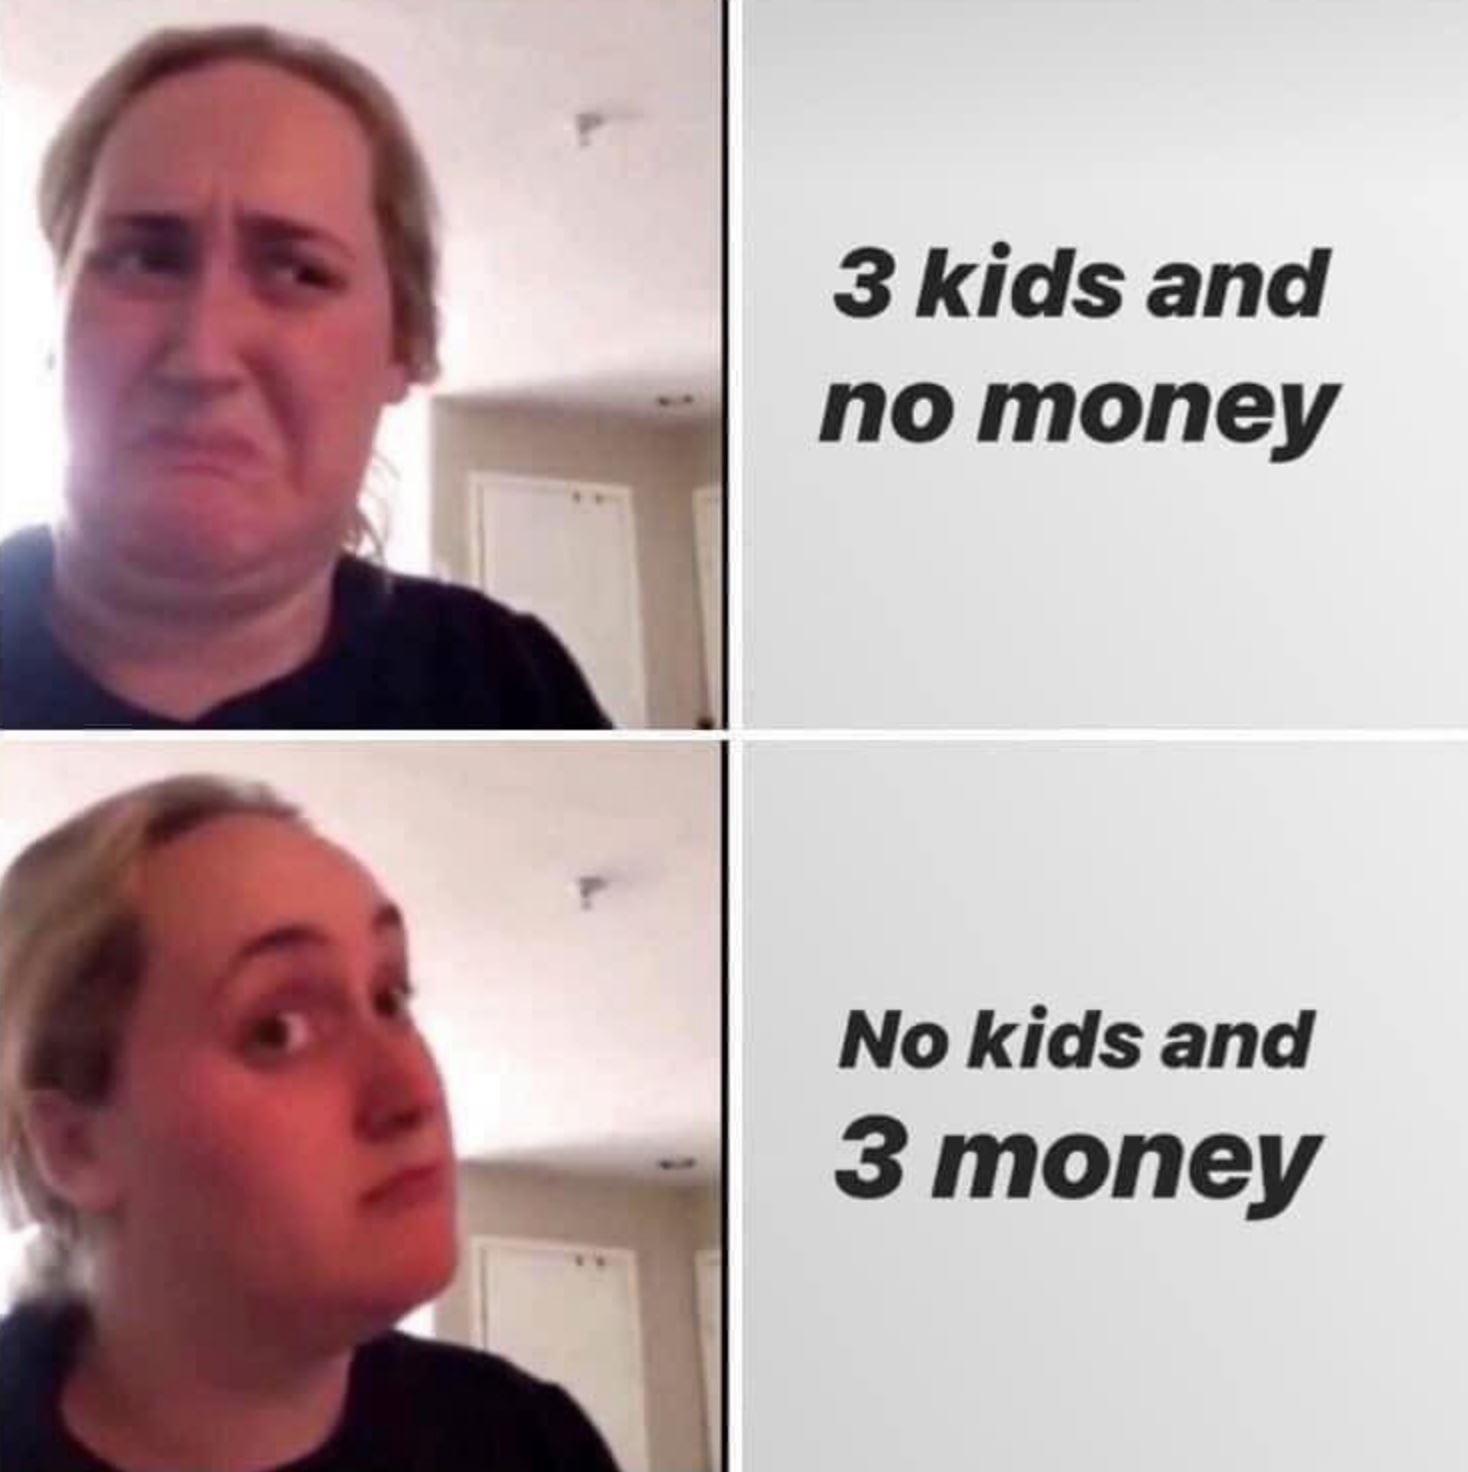 mortifying ordeal of being known meme - 3 kids and no money No kids and 3 money